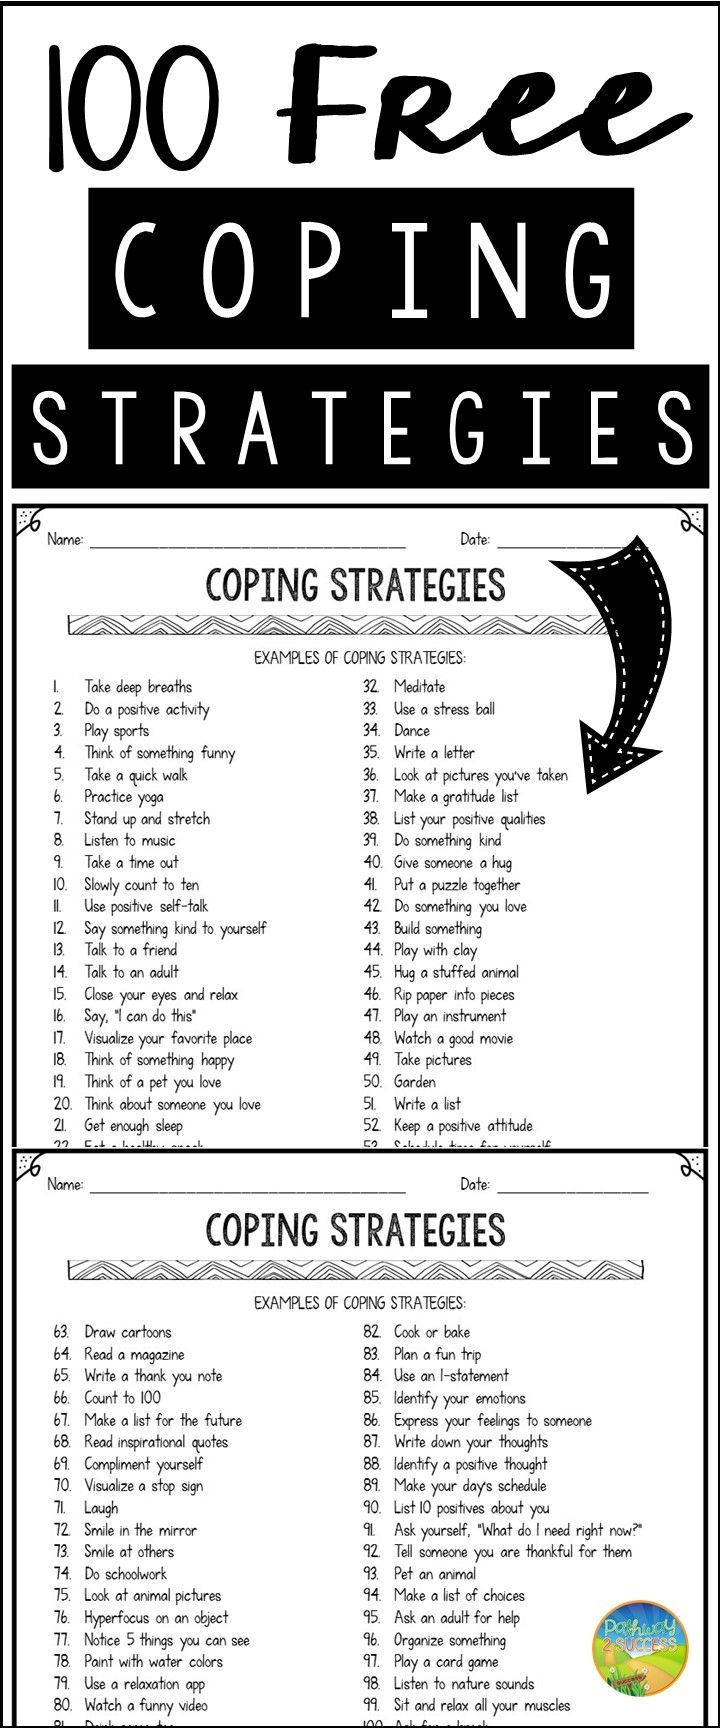 100 FREE coping strategies for anxiety, anger, depression, and more.